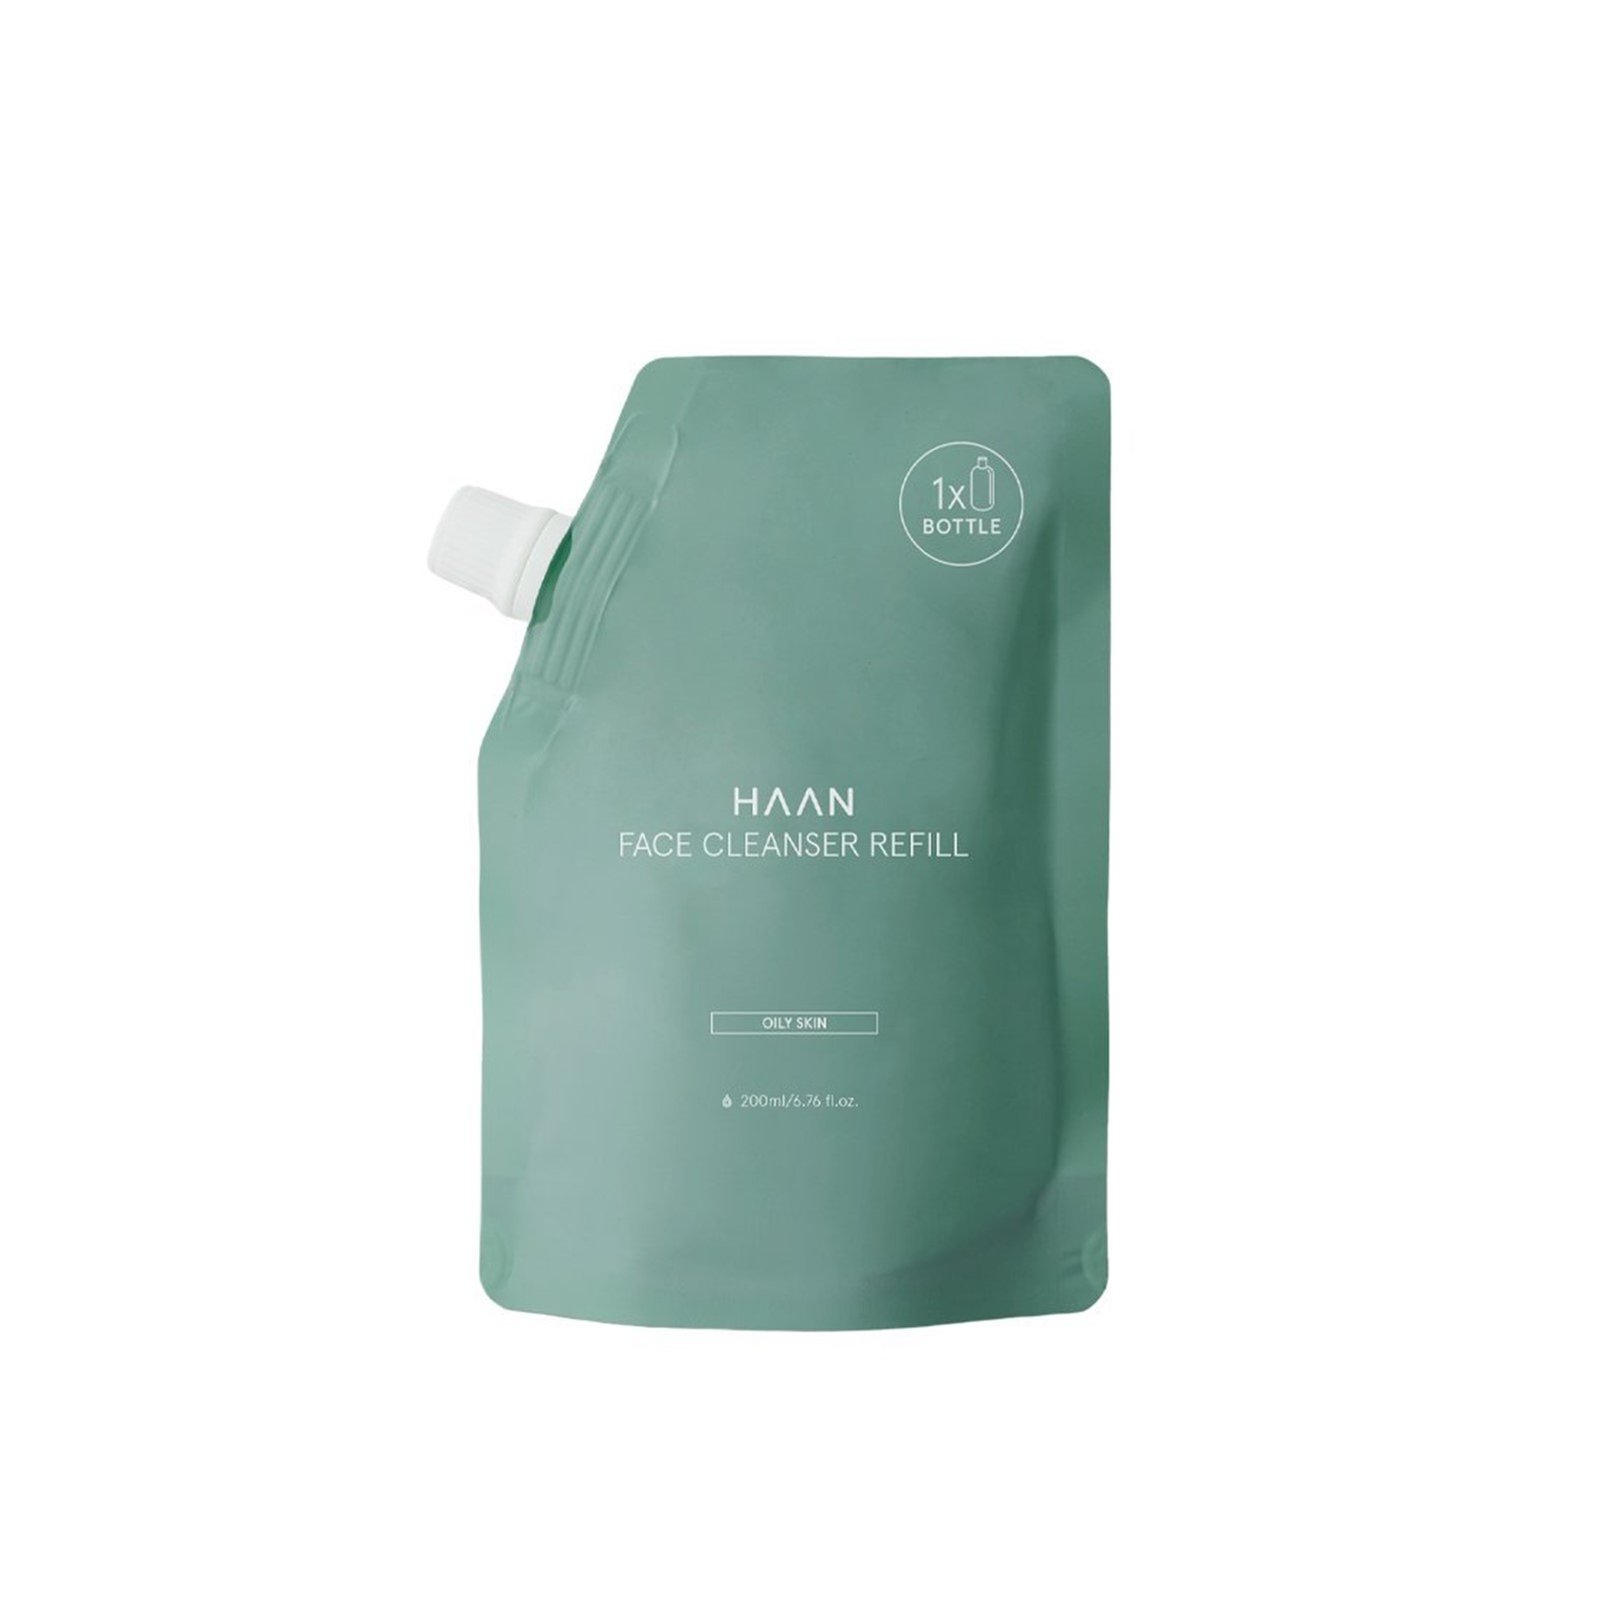 HAAN Niacinamide Purifying Face Cleanser Gel Refill 200ml